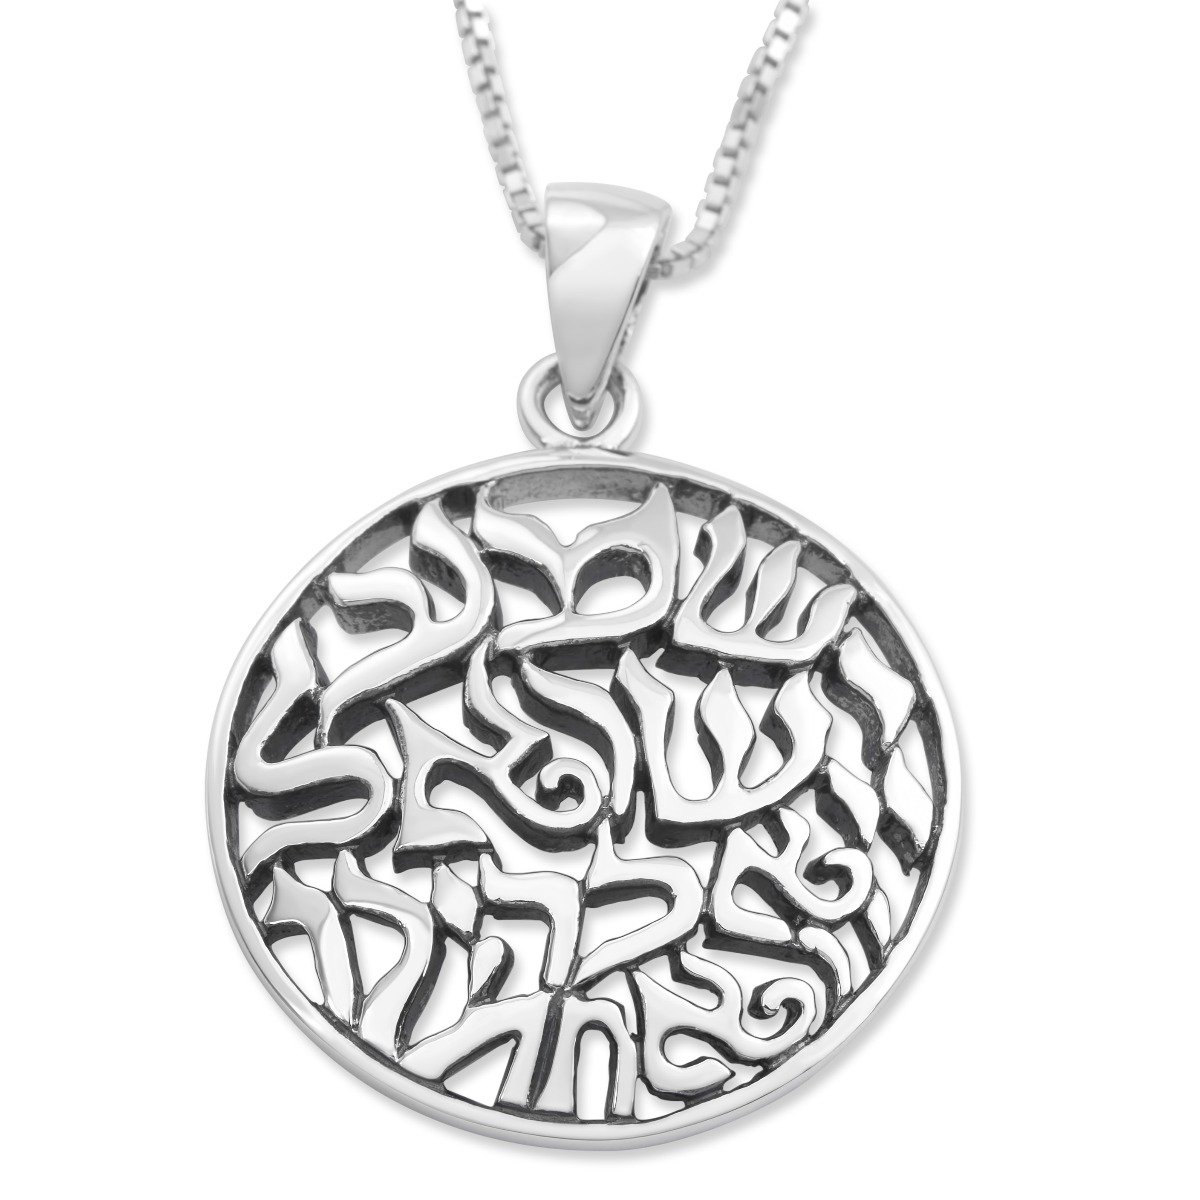 925 Sterling Silver Shema Yisrael Necklace - 1